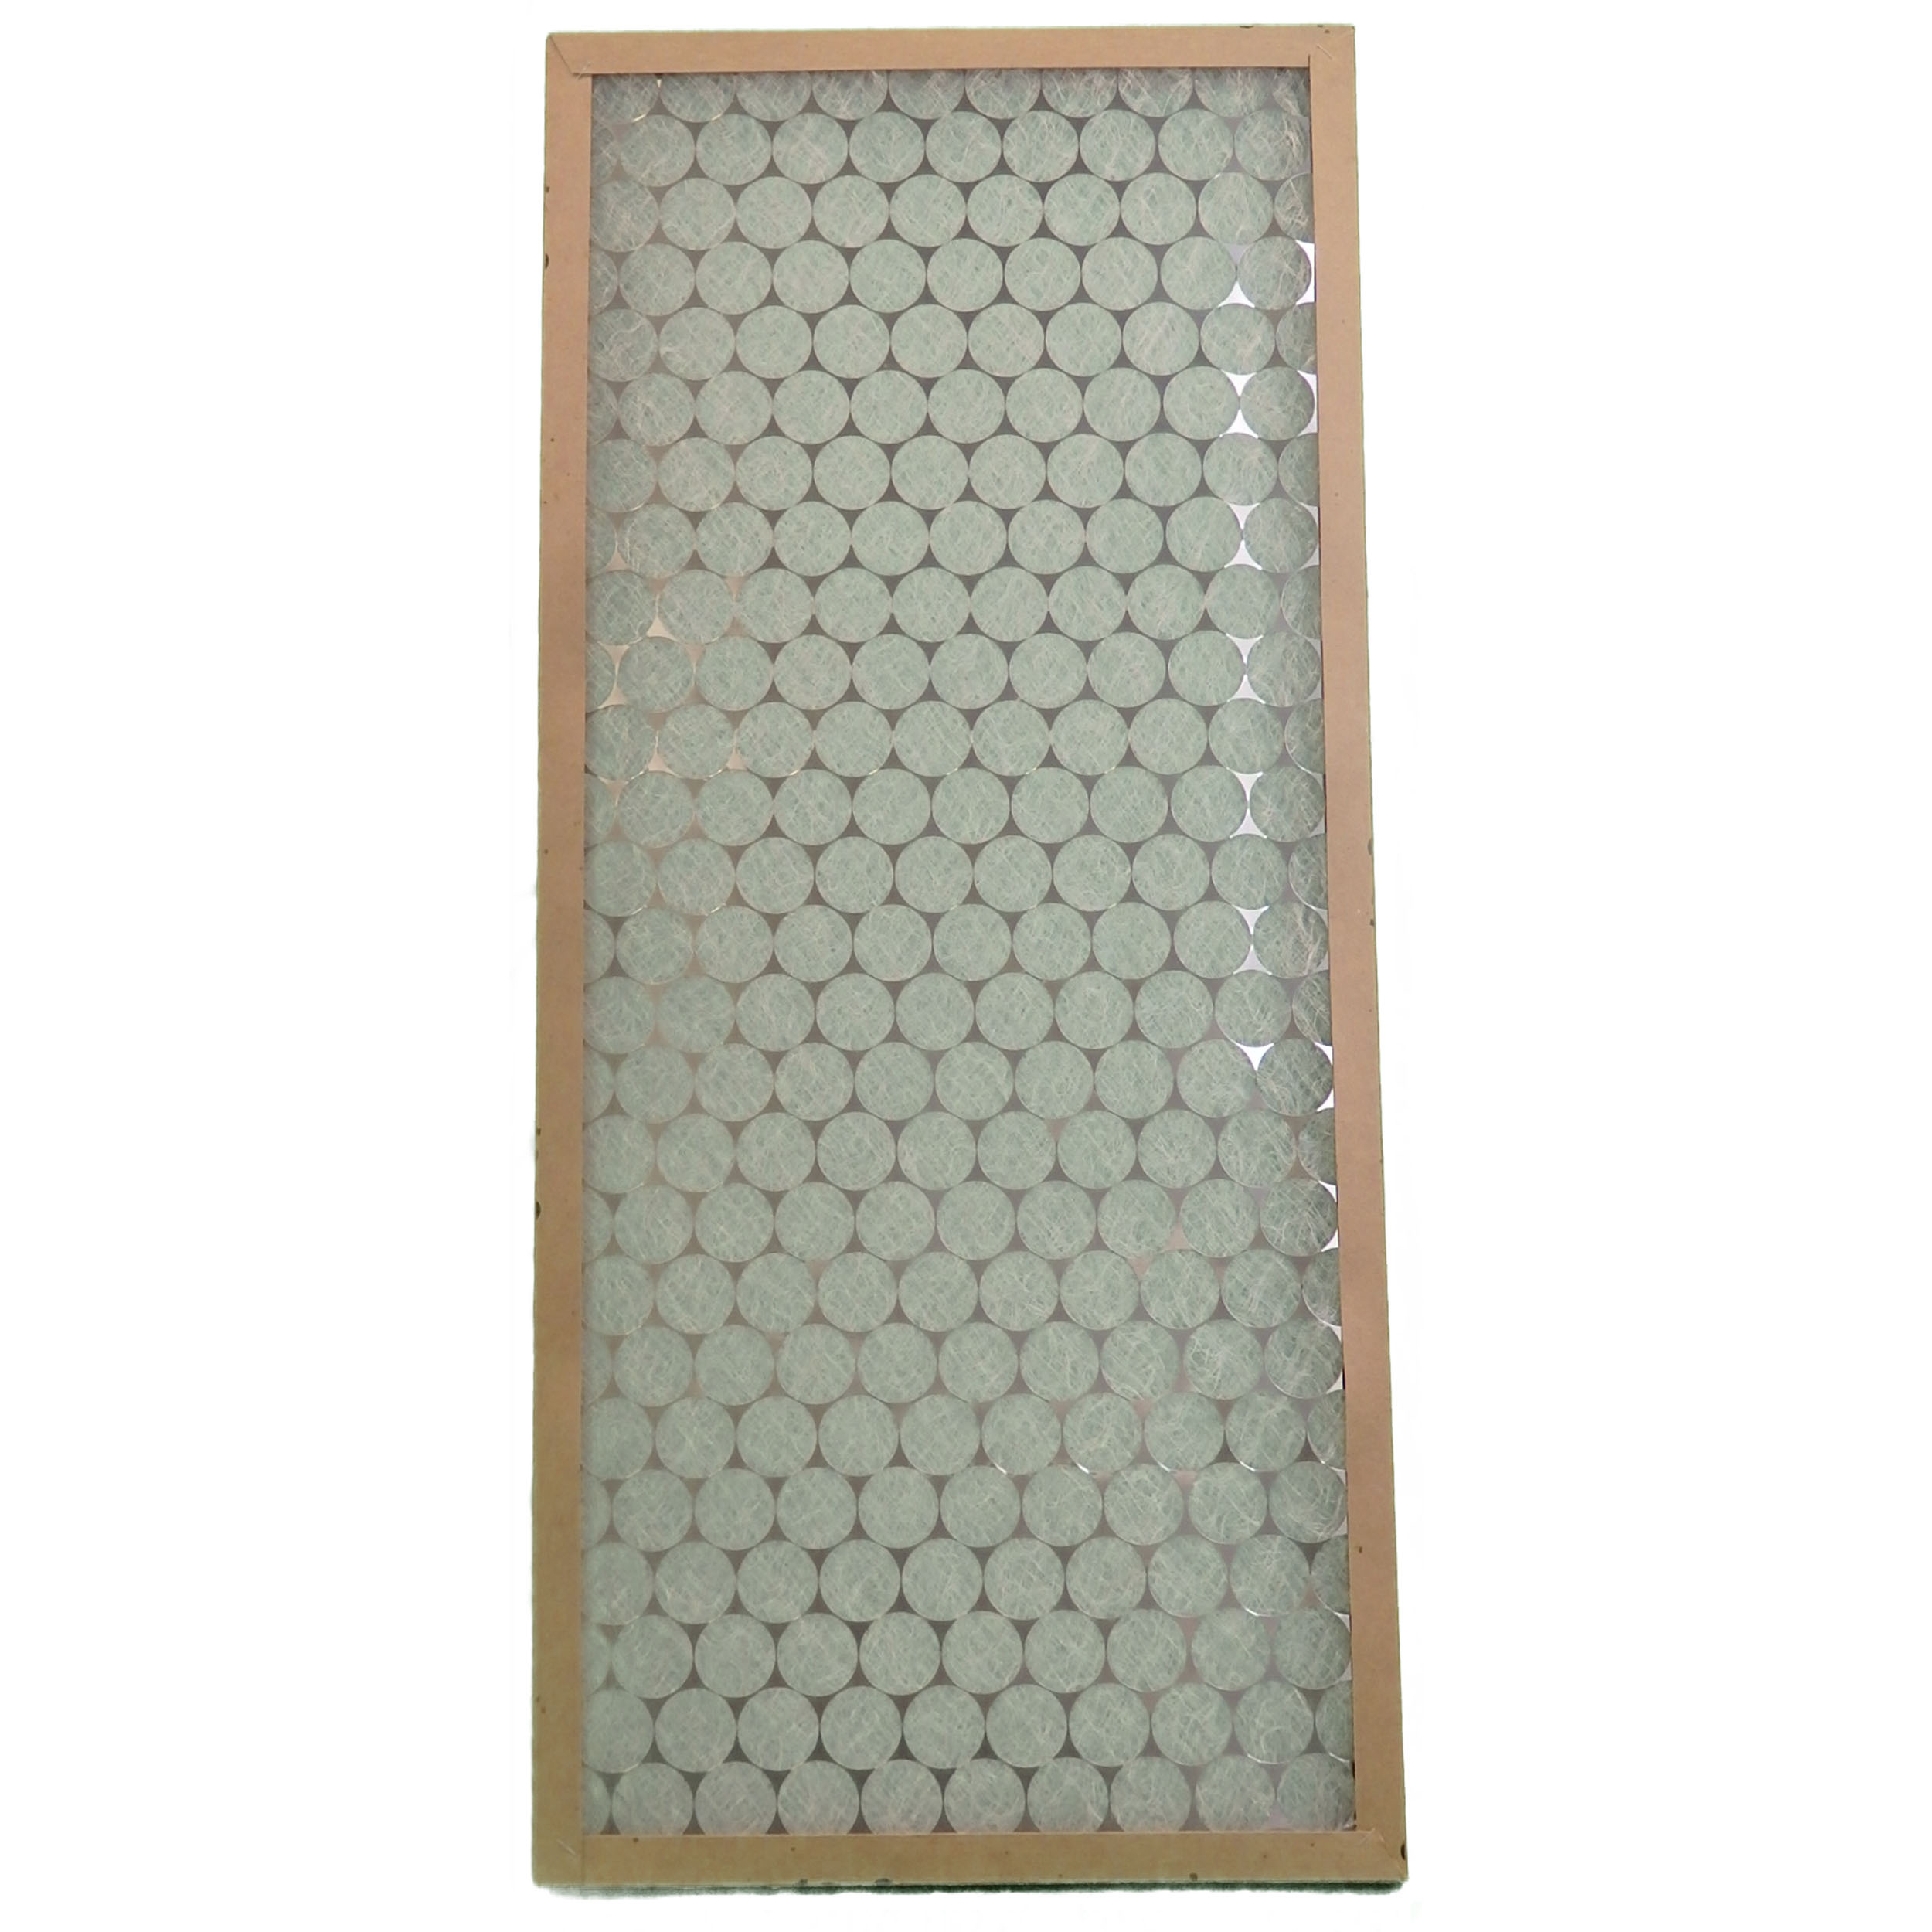 Fiberglass Replacement Filters For 39181